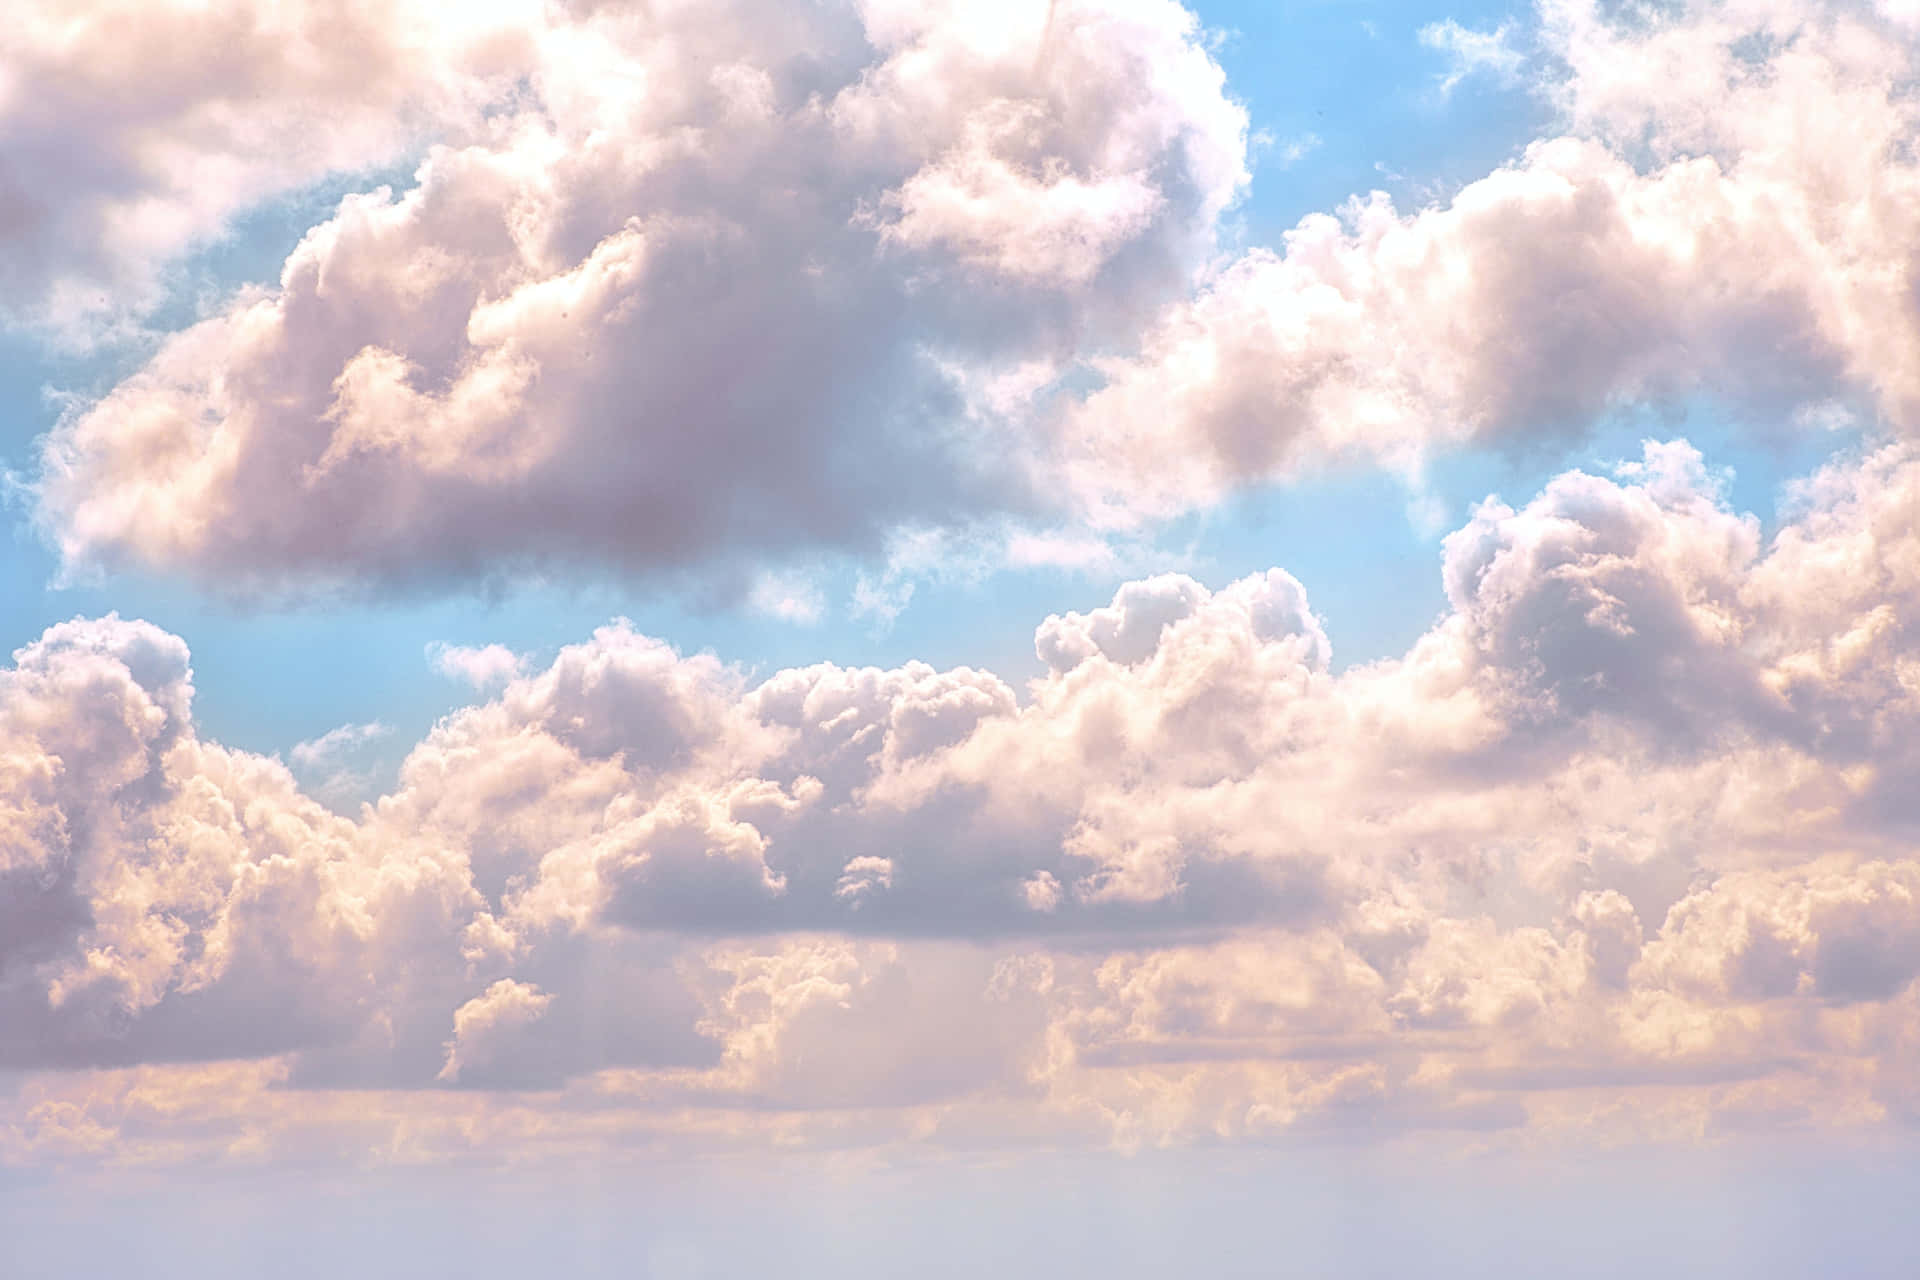 Cloudy Sky Images - Free Download on Freepik